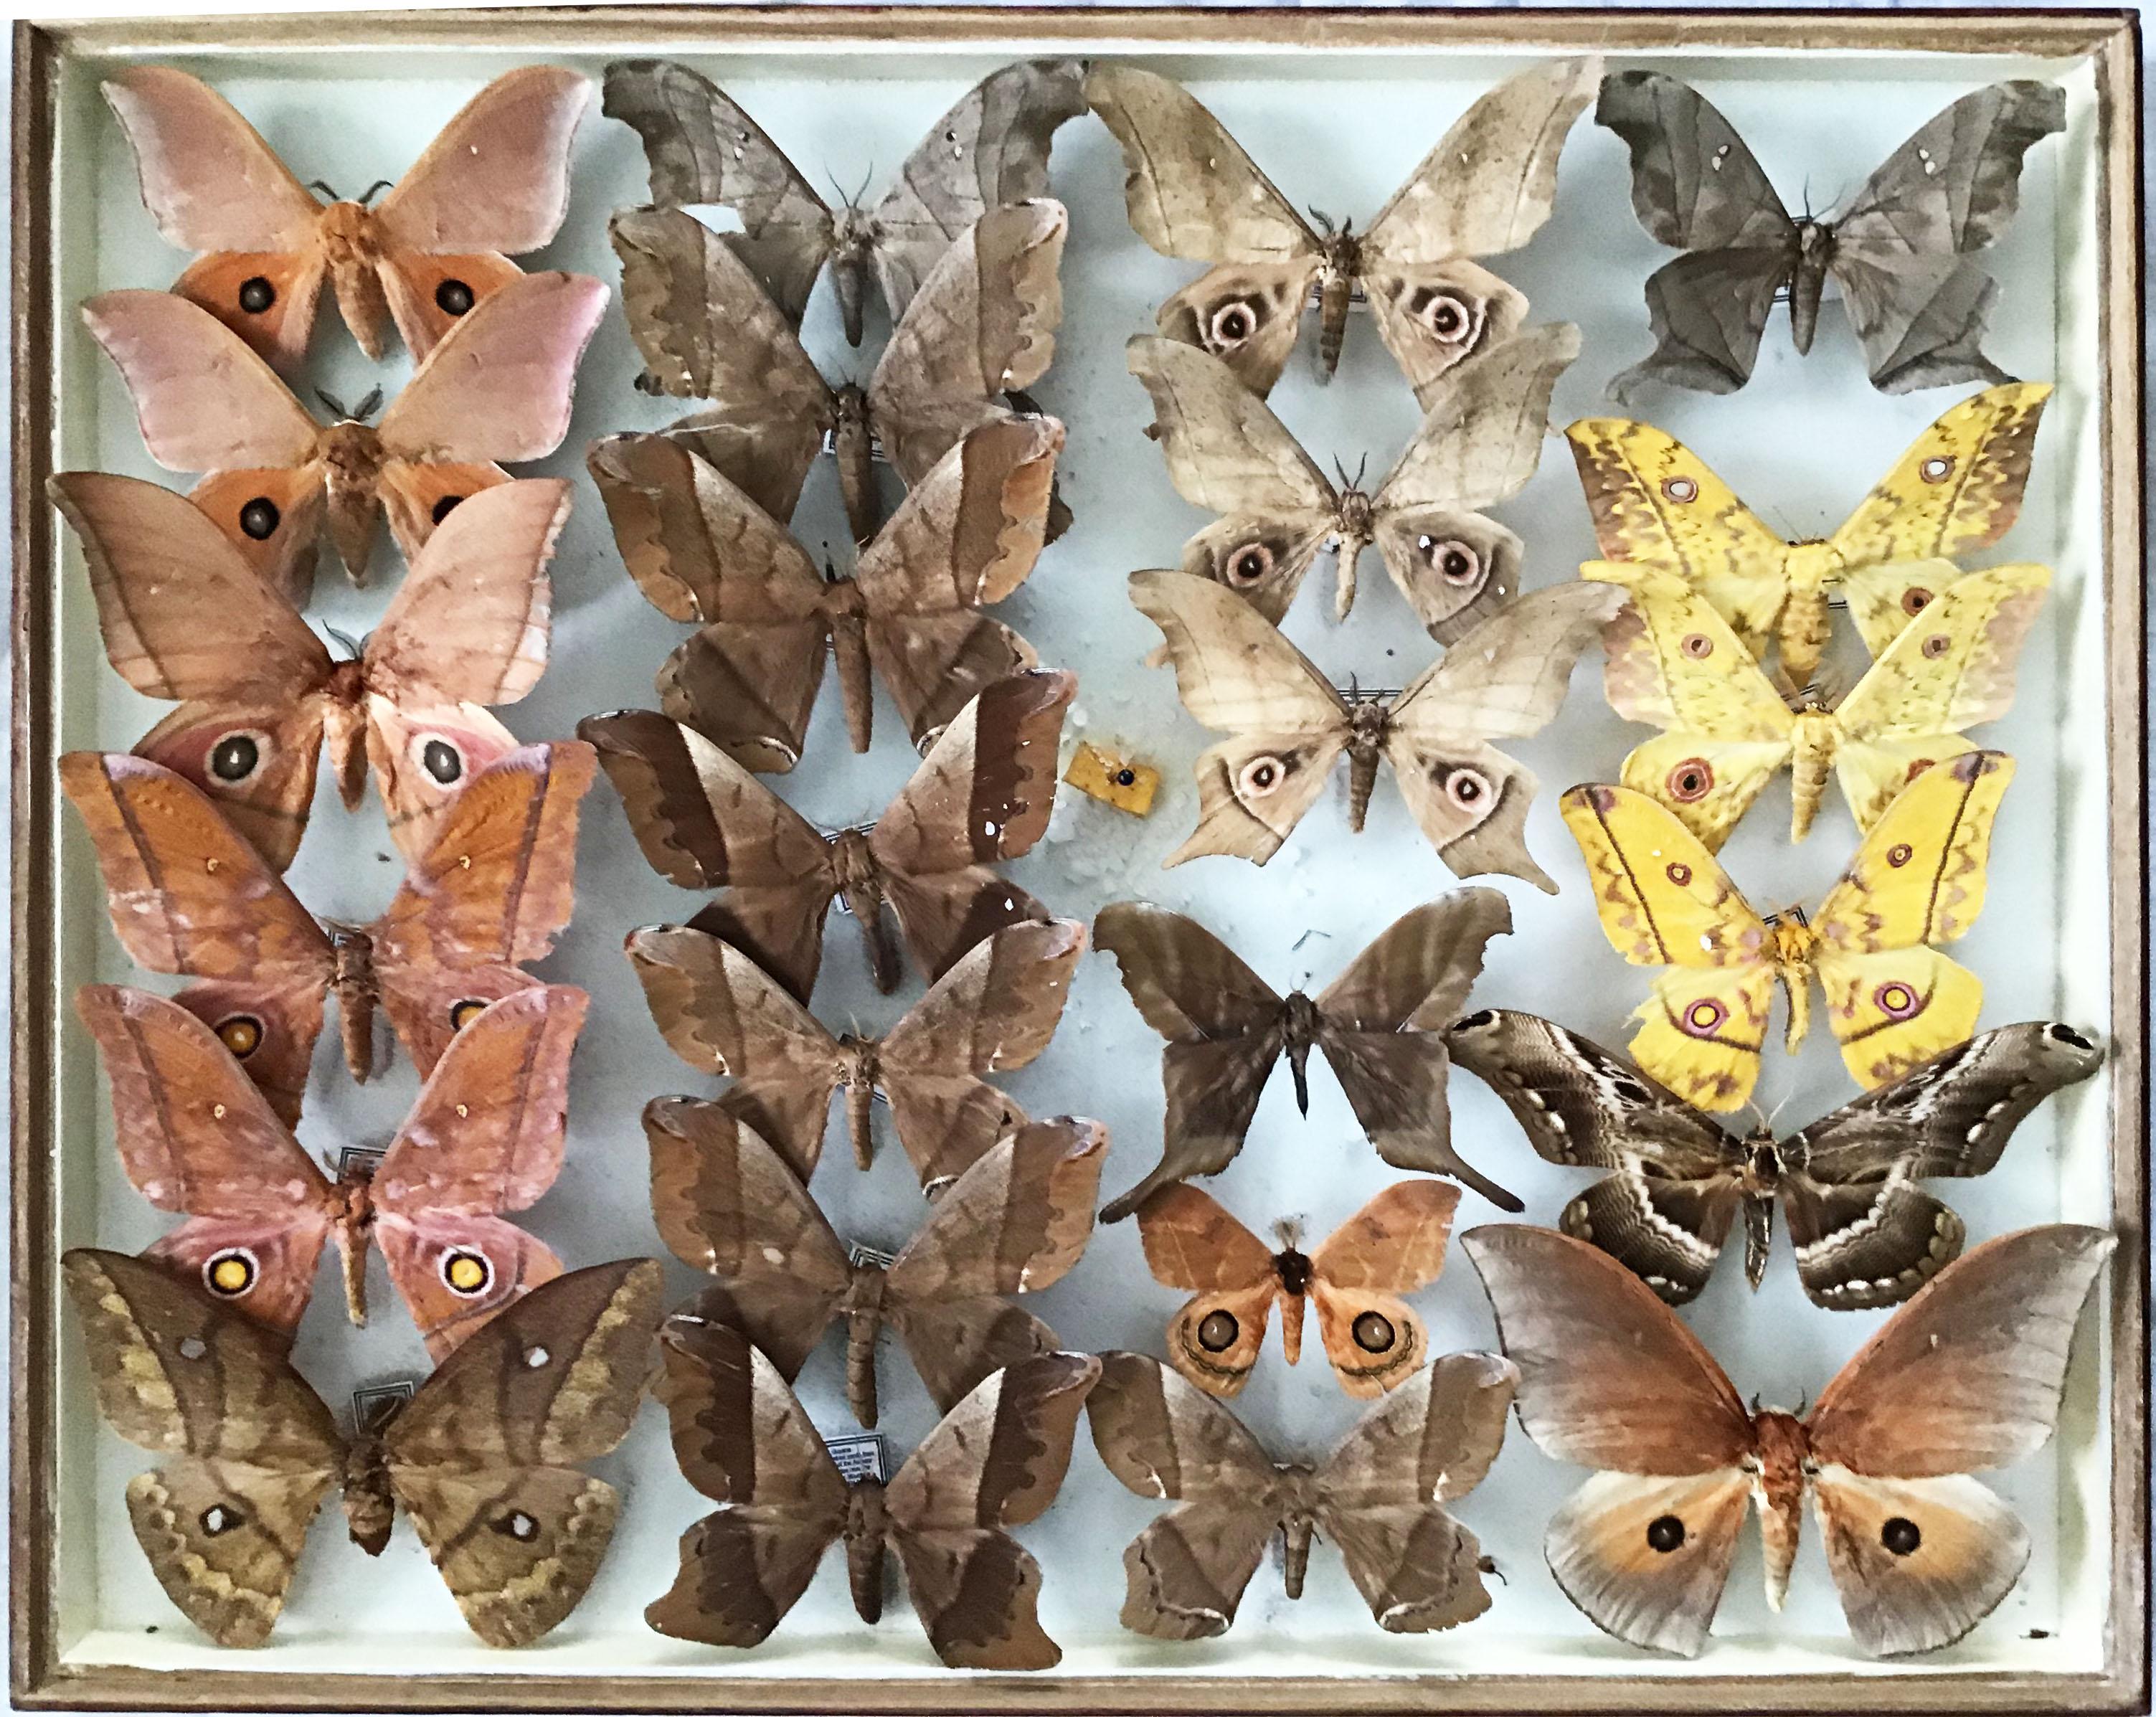 Exceptional set of eight butterfly and moth specimens from around the world, placed in beautiful vintage glass and wood display cases from the 1940s, originally painted red and in beautiful condition.

These cases include rare Saturniidae Moths,